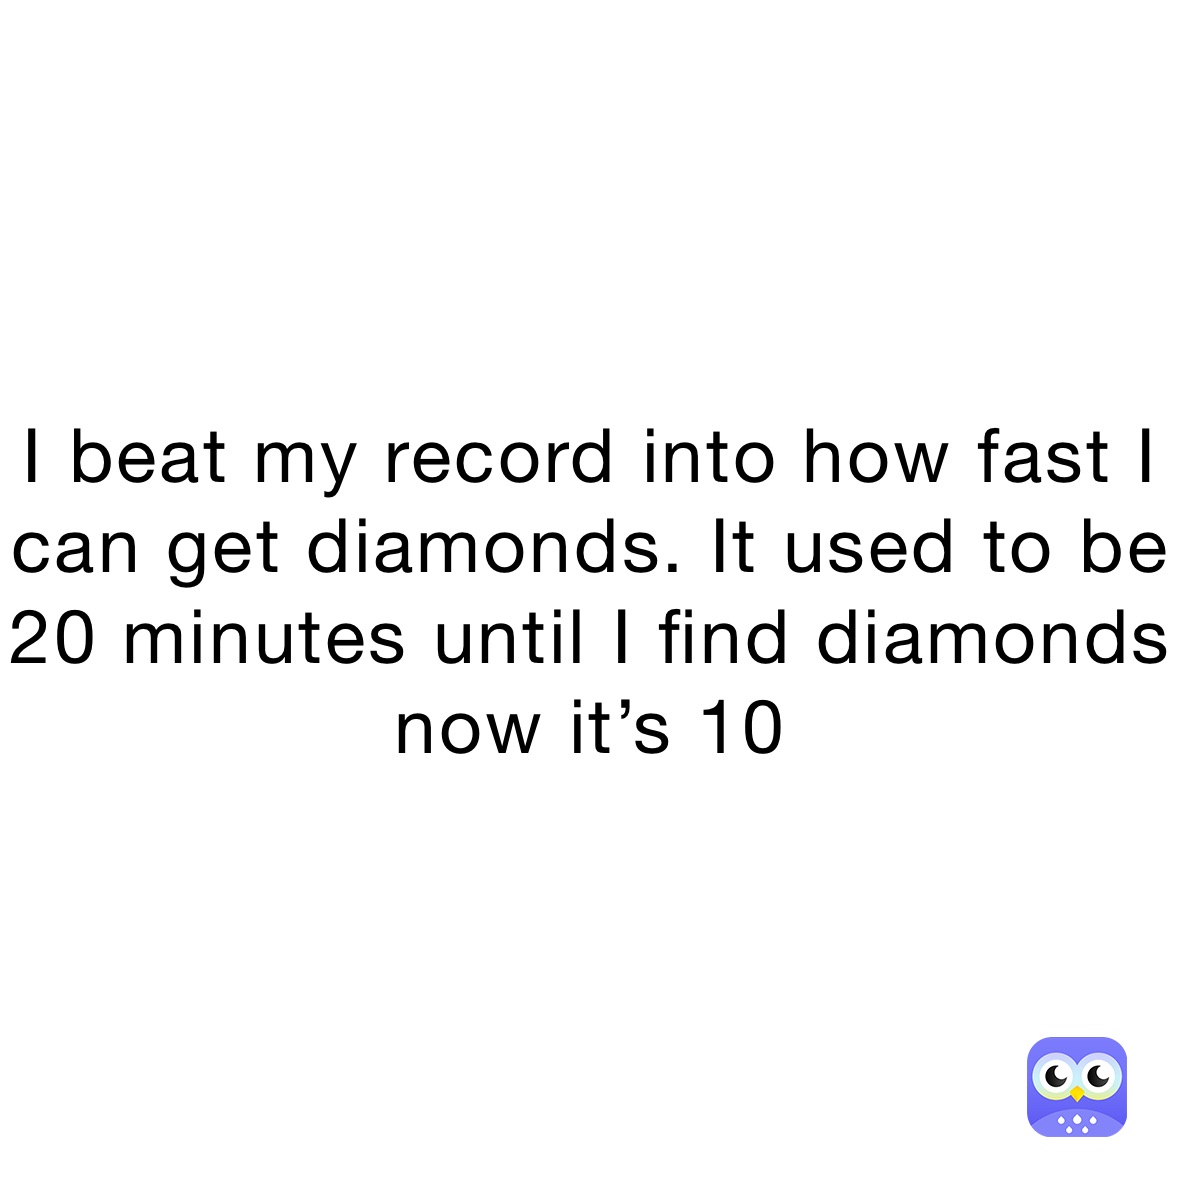 I beat my record into how fast I can get diamonds. It used to be 20 minutes until I find diamonds now it’s 10